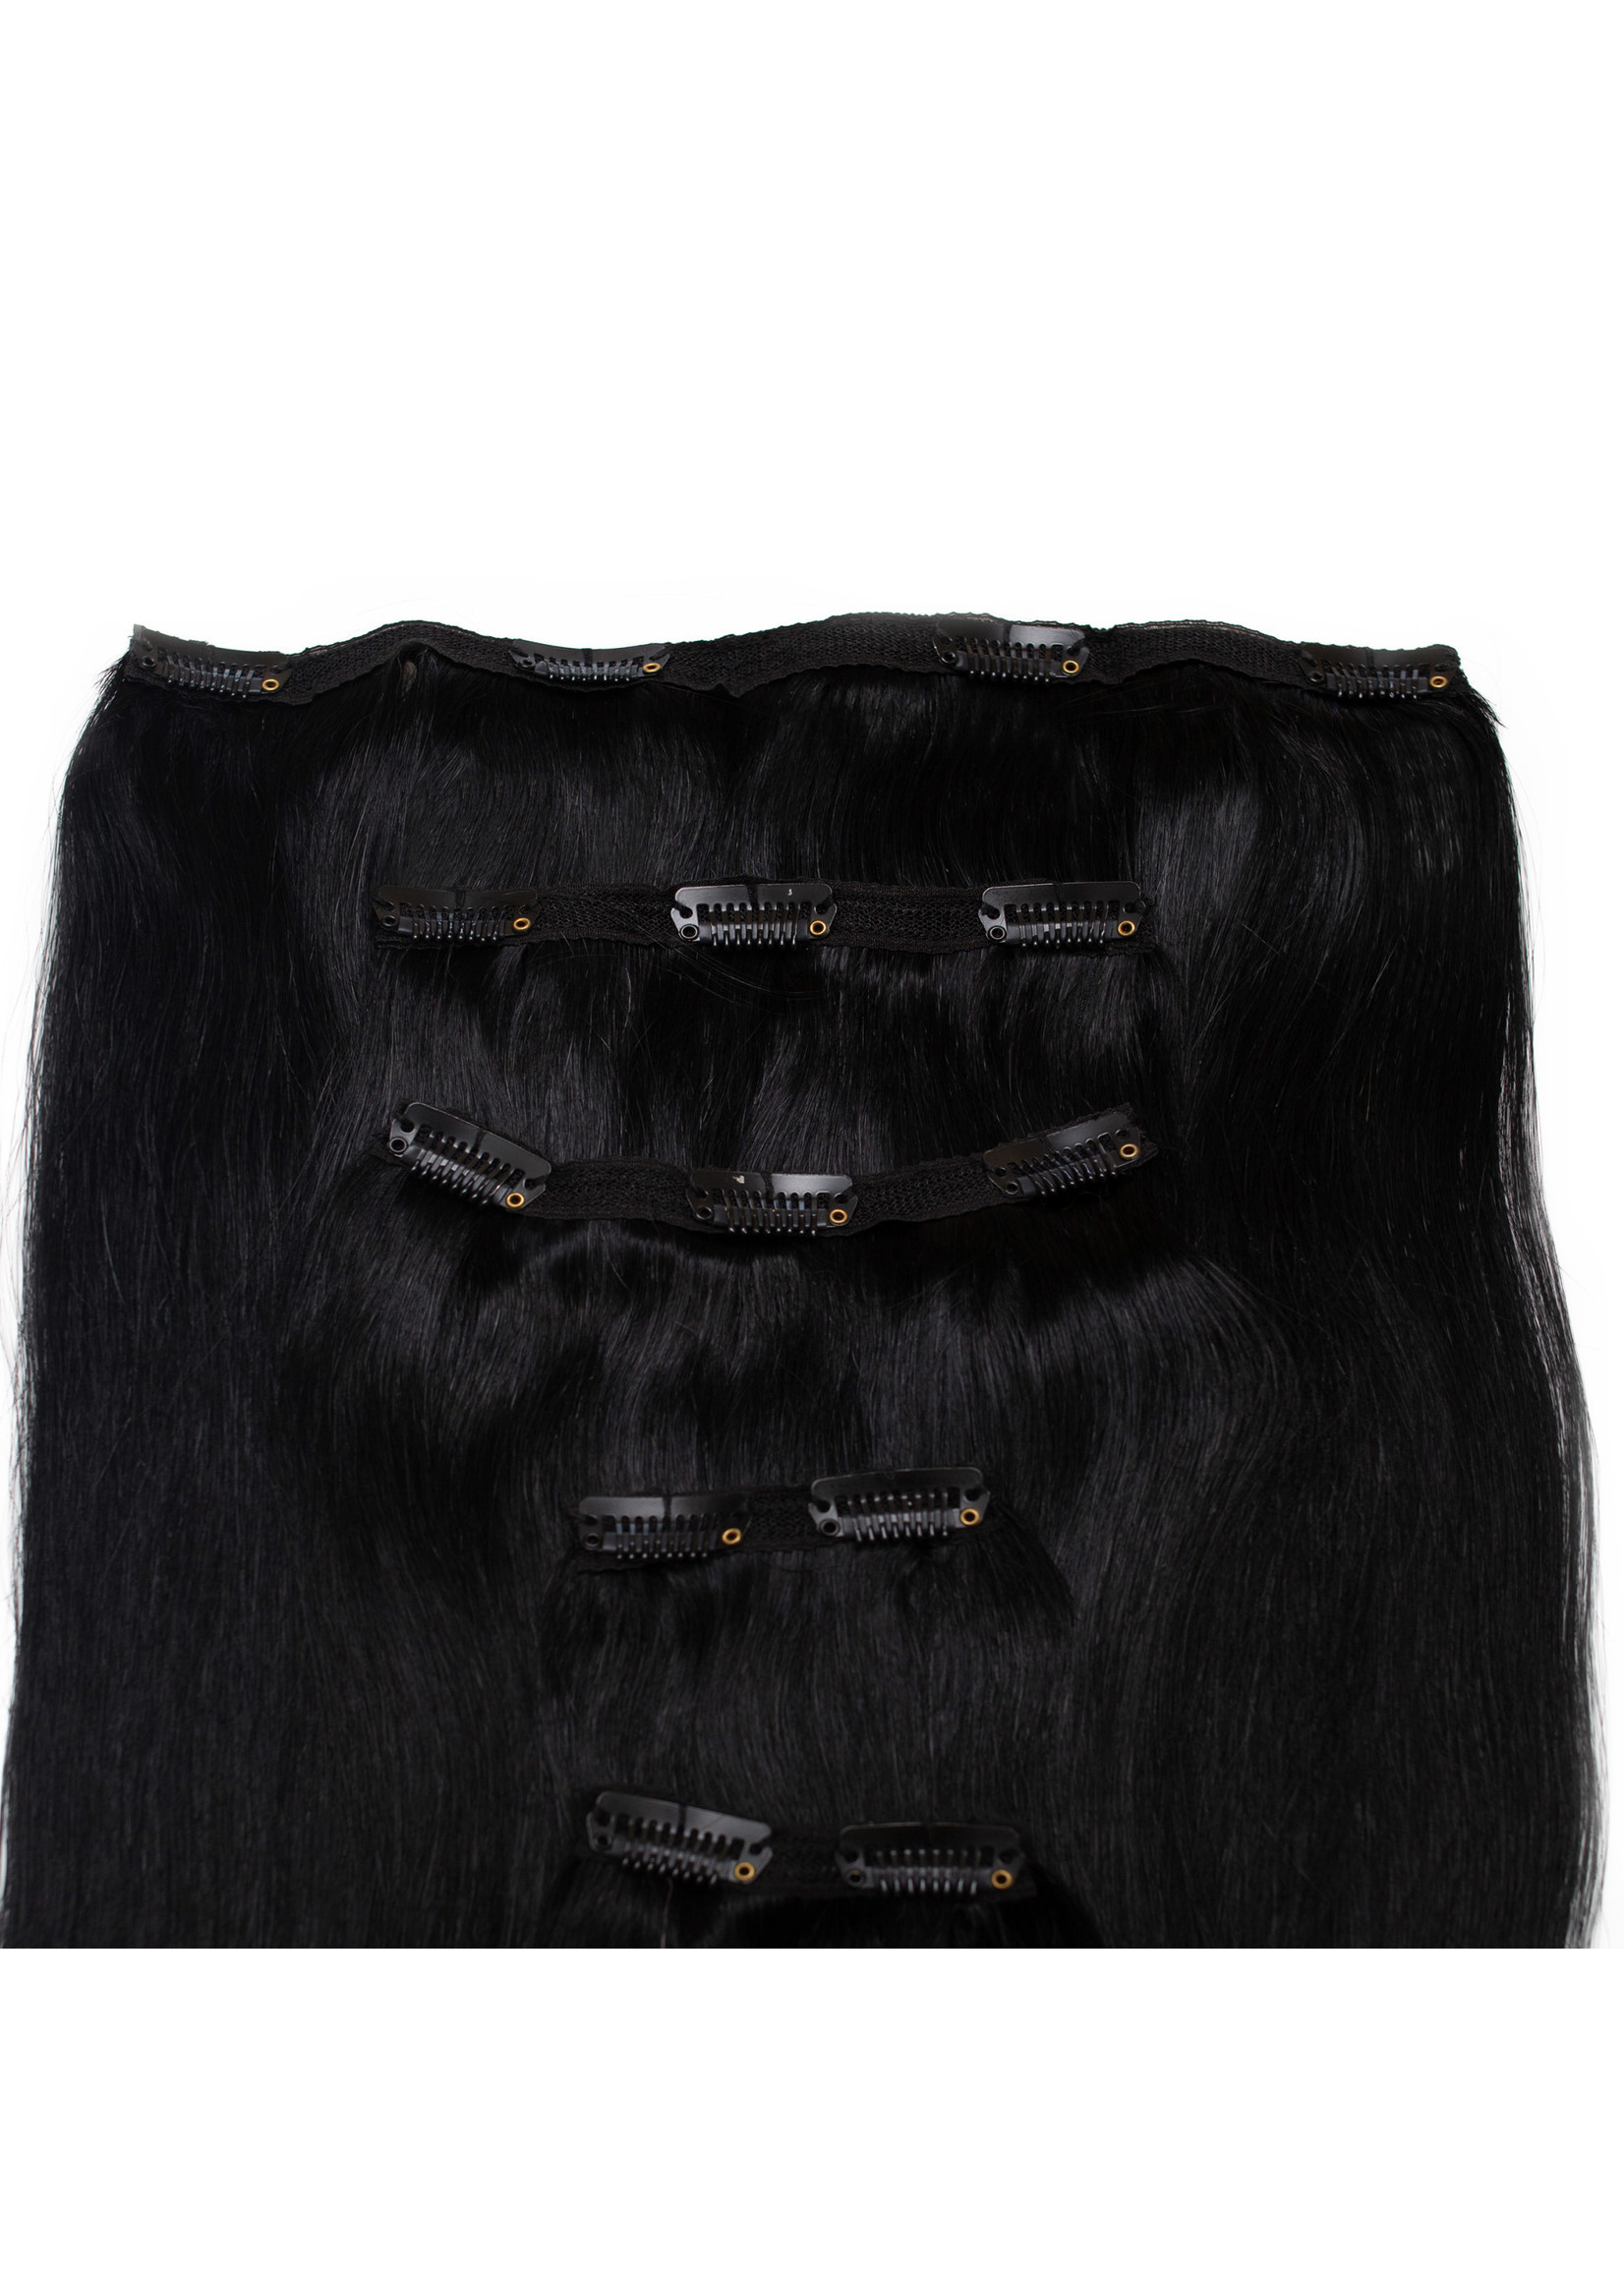 Seamless1 Seamless1 Human Hair Clip-in 5pc Hair Extensions 21.5 Inches - Midnight